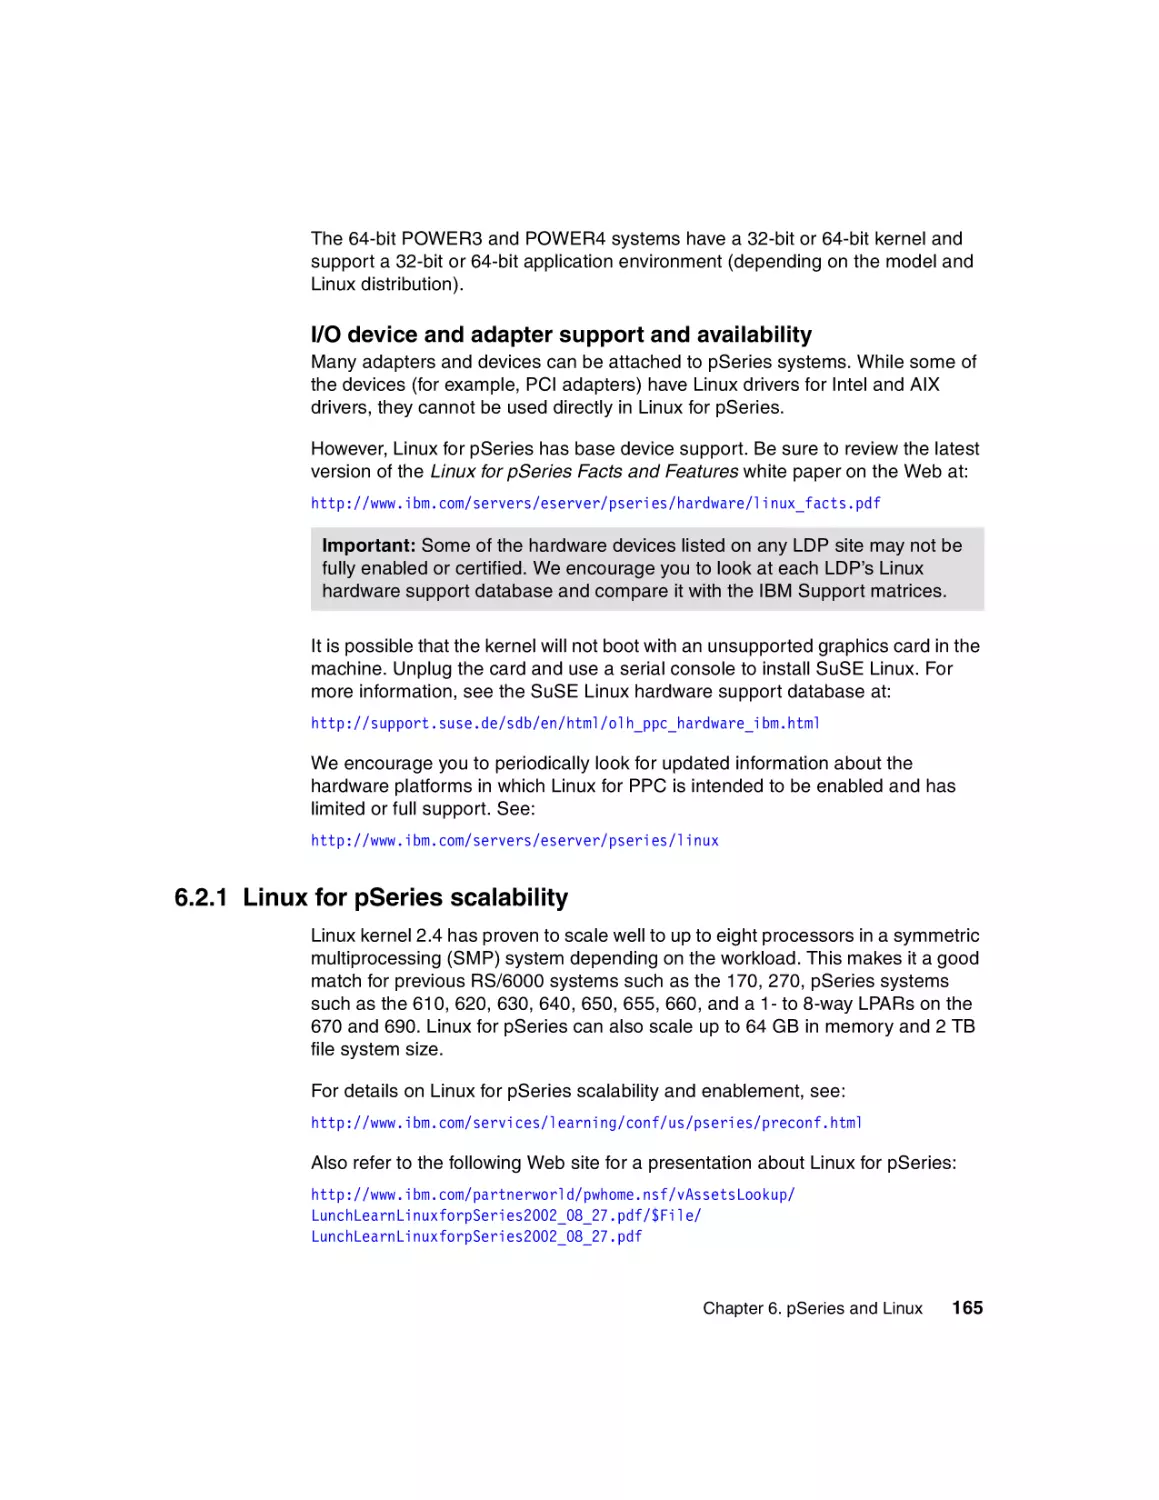 6.2.1 Linux for pSeries scalability